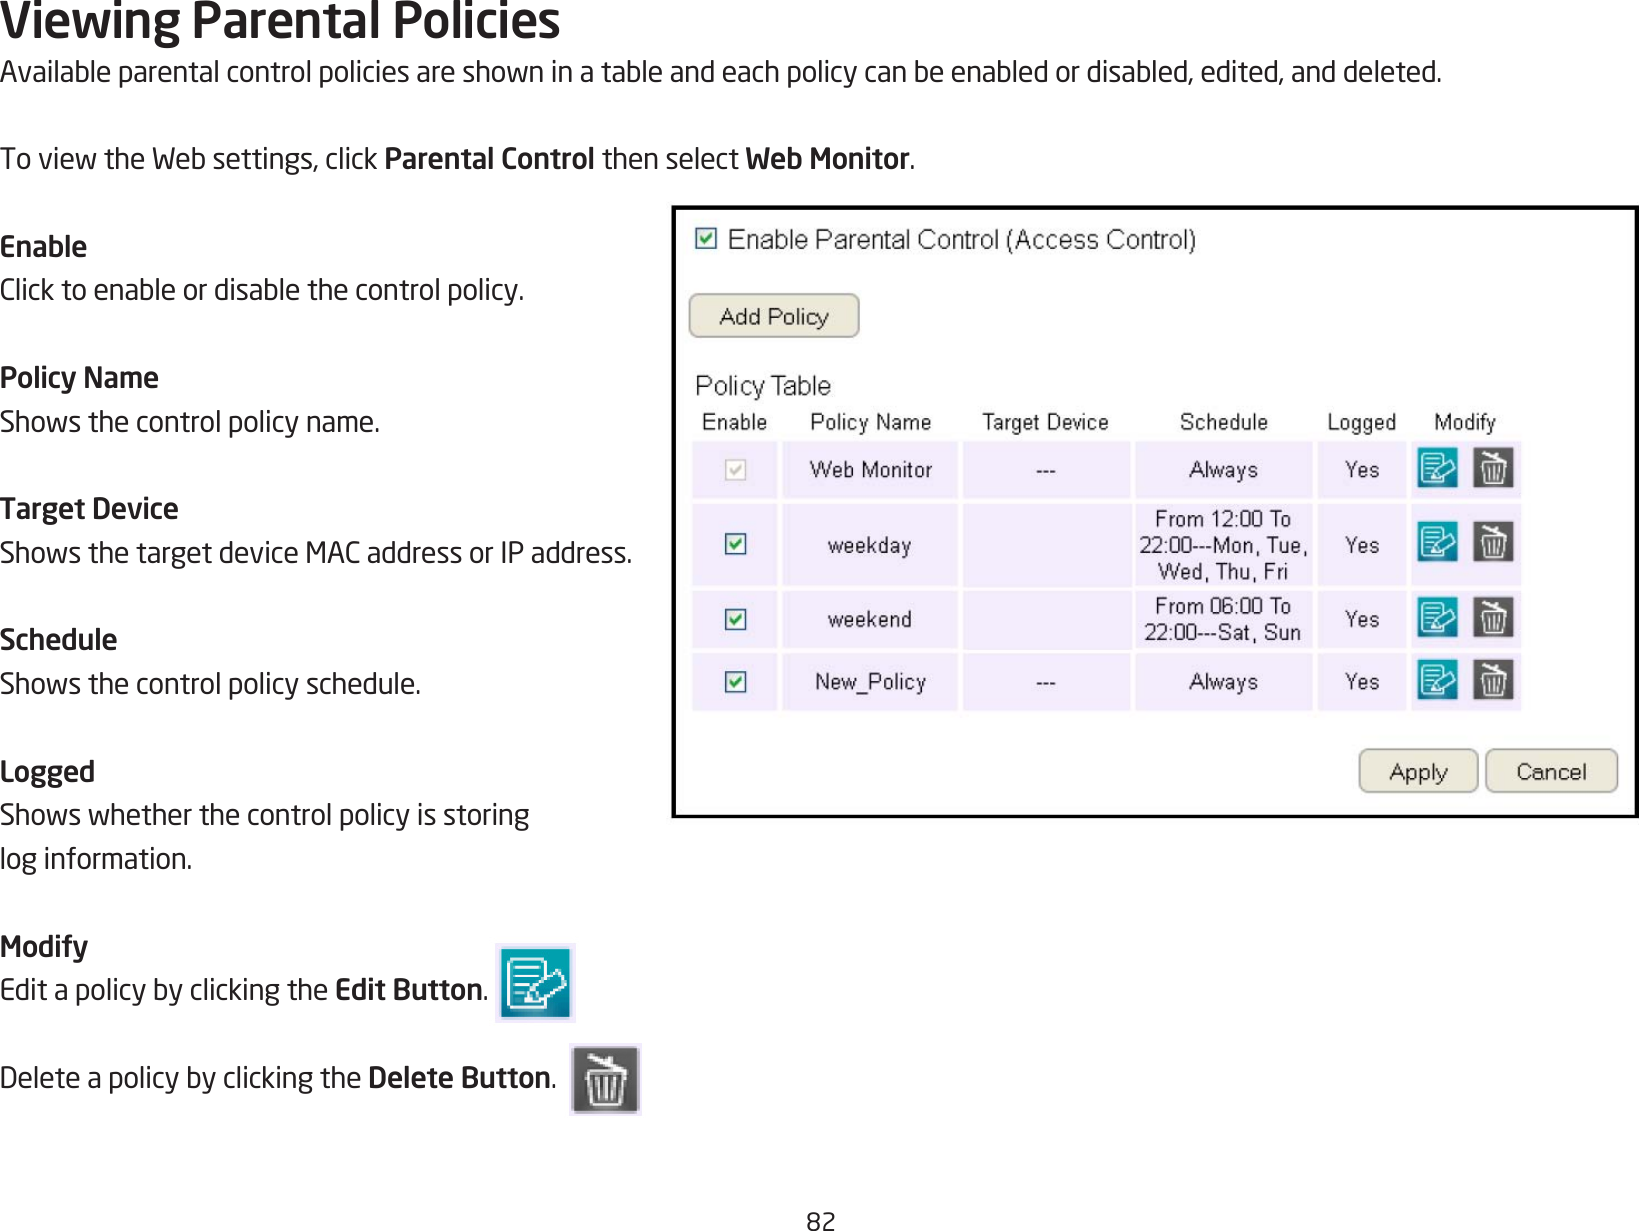 82Viewing Parental PoliciesAvailableparentalcontrolpoliciesareshowninatableandeachpolicycanbeenabledordisabled,edited,anddeleted.ToviewtheWebsettings,clickParental Control then select Web Monitor.EnableClicktoenableordisablethecontrolpolicy.Policy NameShowsthecontrolpolicyname.Target DeviceShowsthetargetdeviceMACaddressorIPaddress.ScheduleShowsthecontrolpolicyschedule.LoggedShowswhetherthecontrolpolicyisstoringlog information.ModifyEditapolicybyclickingtheEdit Button. DeleteapolicybyclickingtheDelete Button.